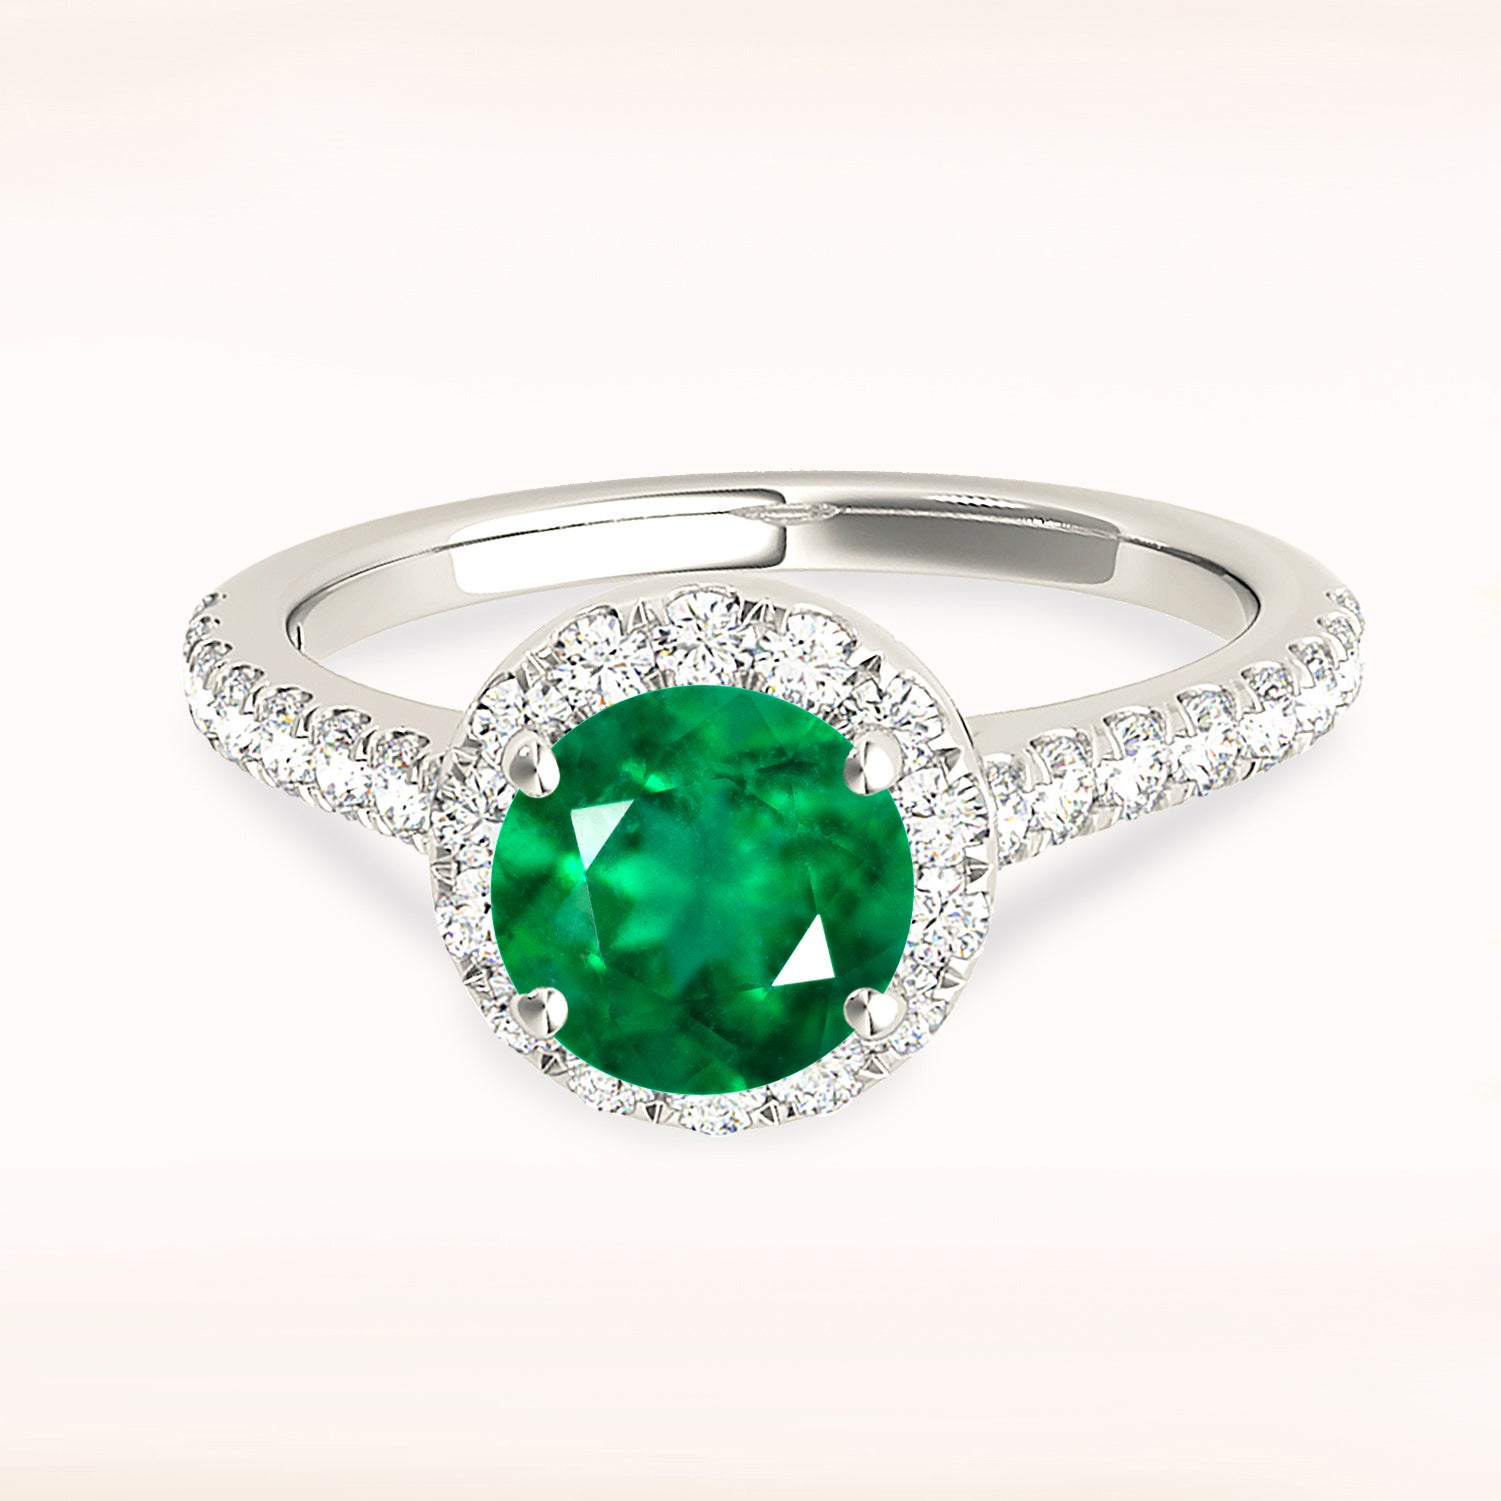 1.14 ct. Genuine Emerald Ring with 0.35 ctw. Diamond Halo And Thin Band,Side Accent Diamonds-in 14K/18K White, Yellow, Rose Gold and Platinum - Christmas Jewelry Gift -VIRABYANI